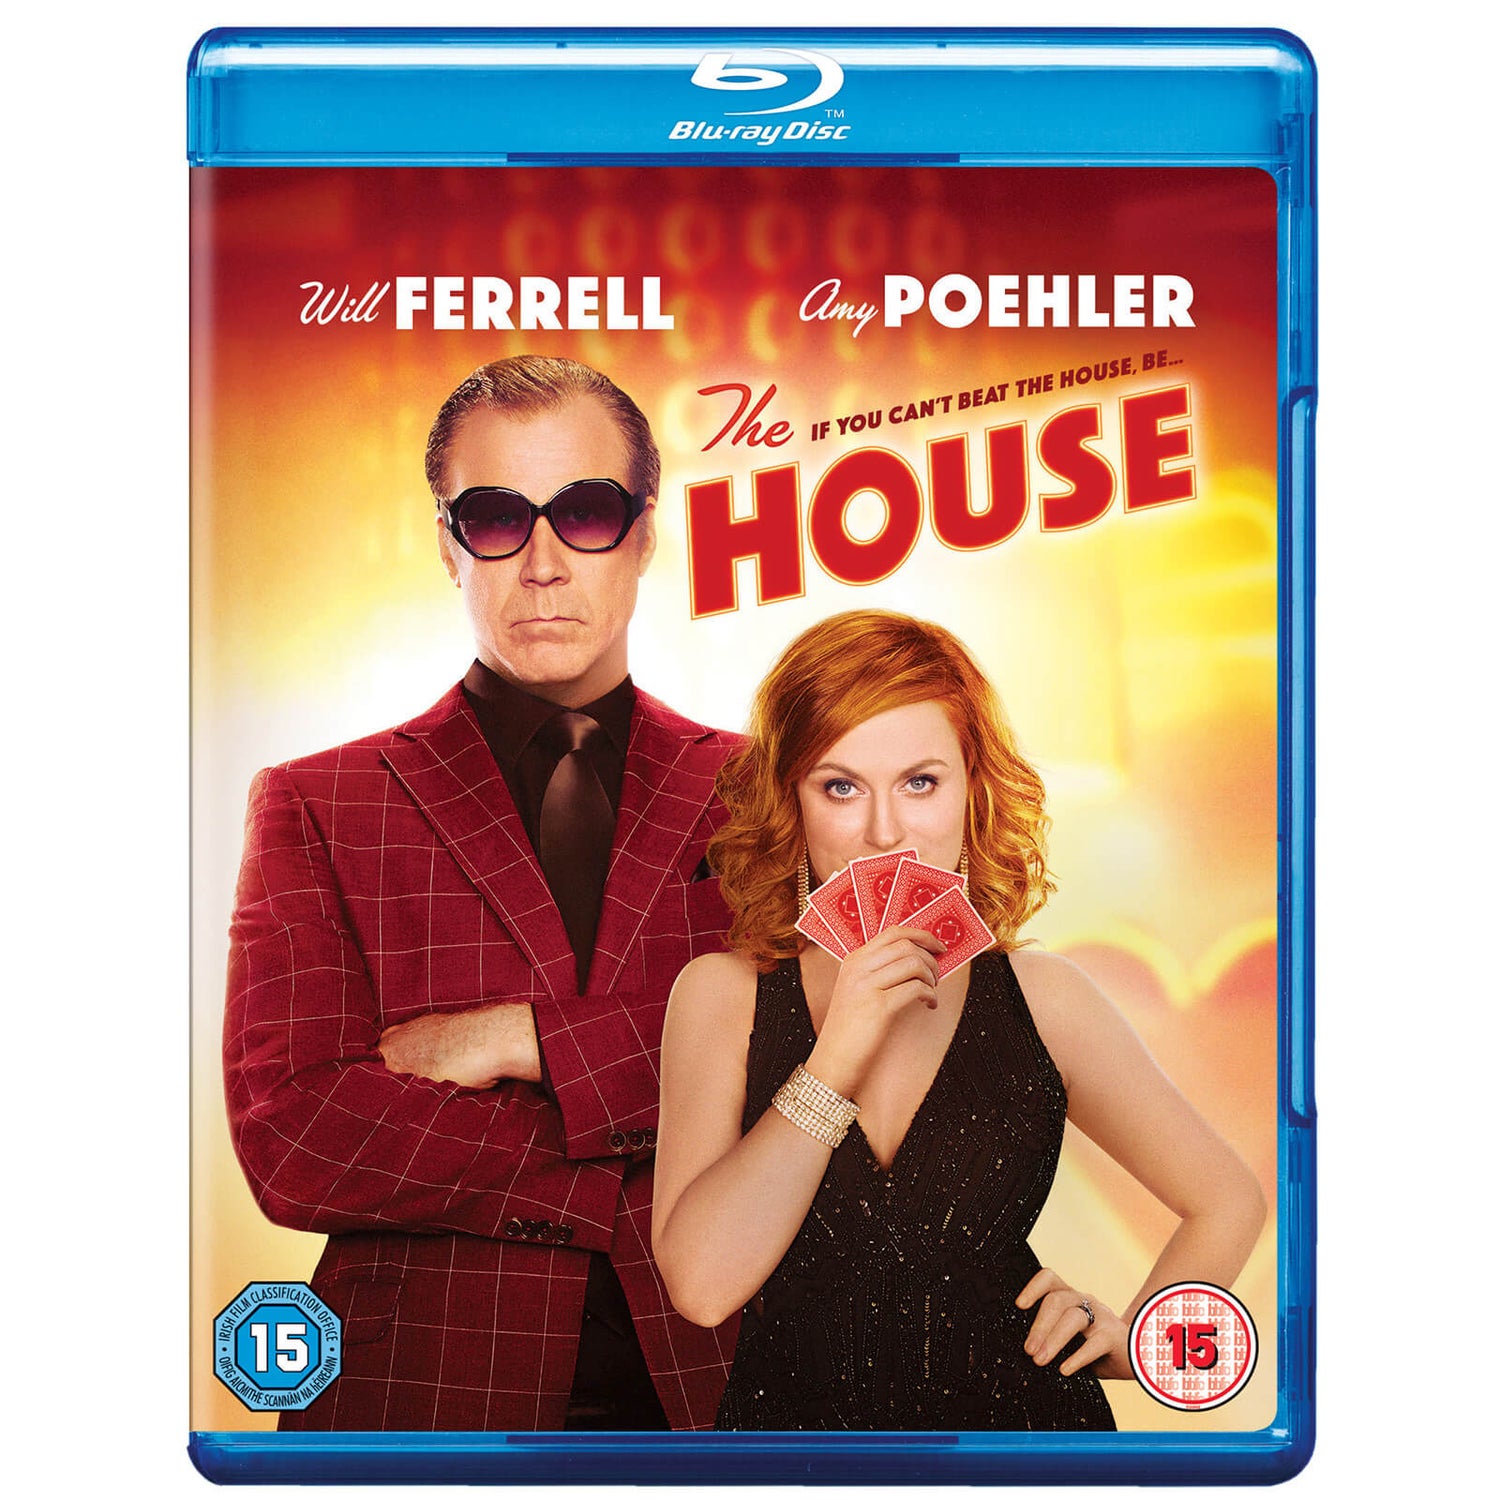 The House (Includes Digital Download)